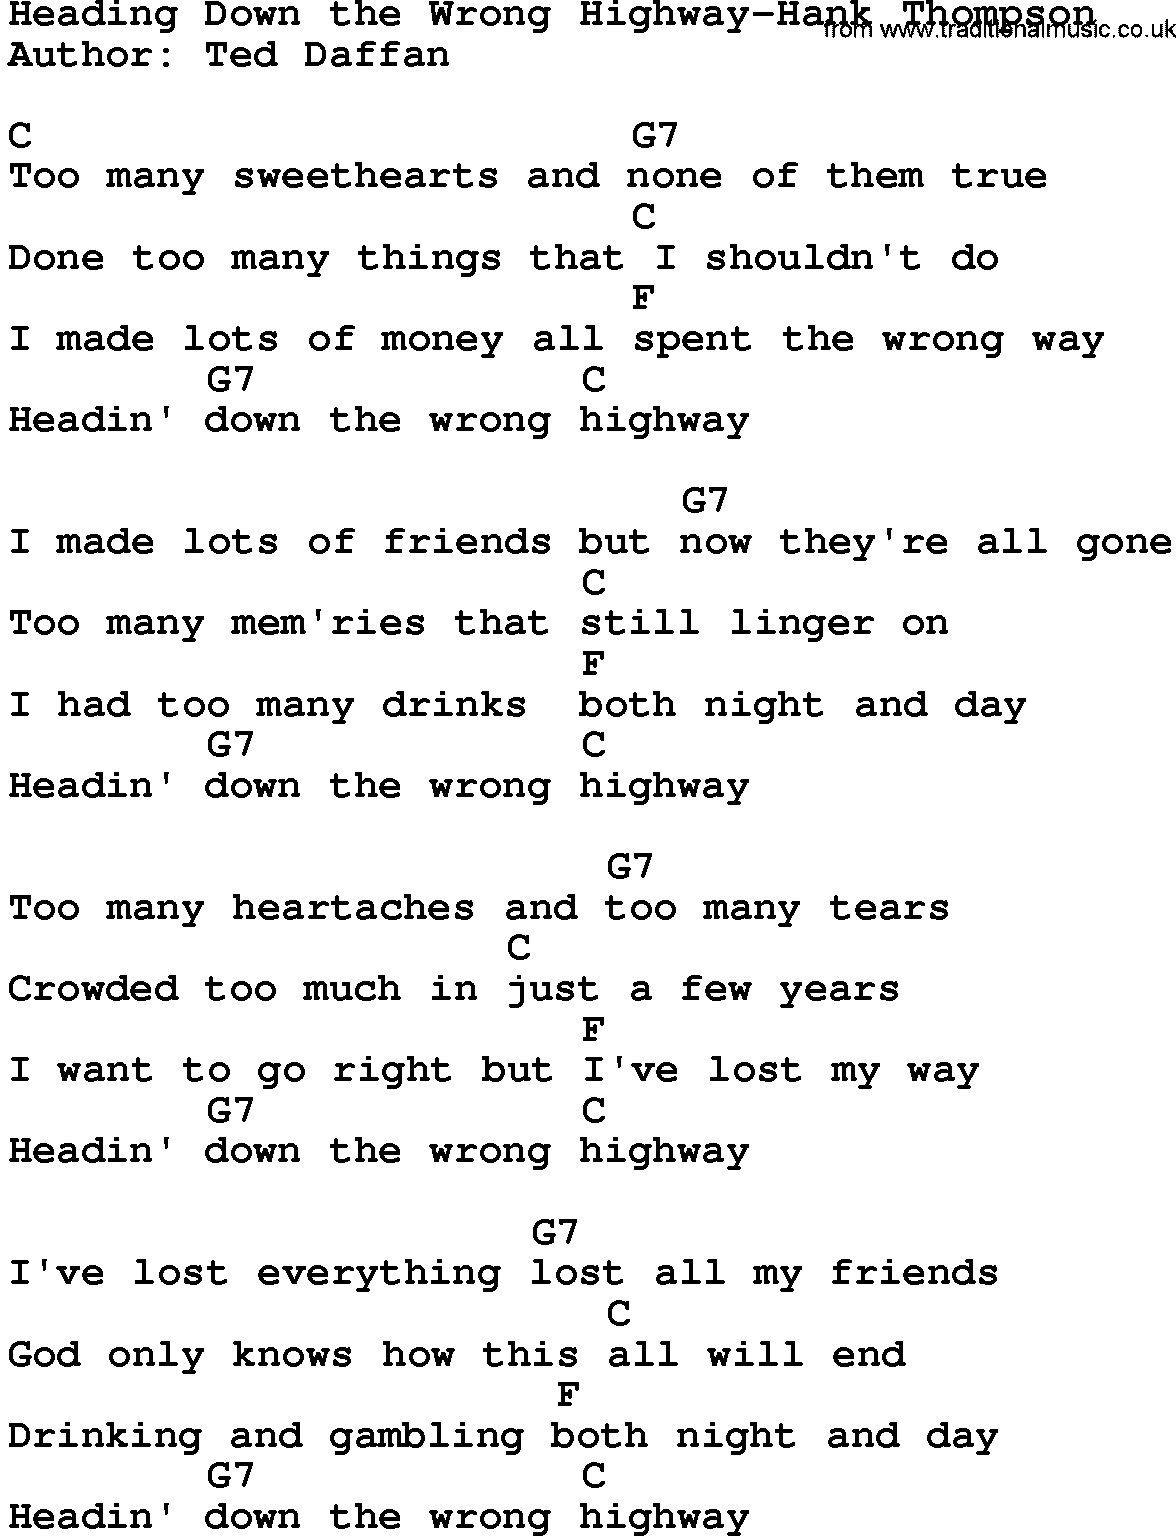 Country music song: Heading Down The Wrong Highway-Hank Thompson lyrics and chords